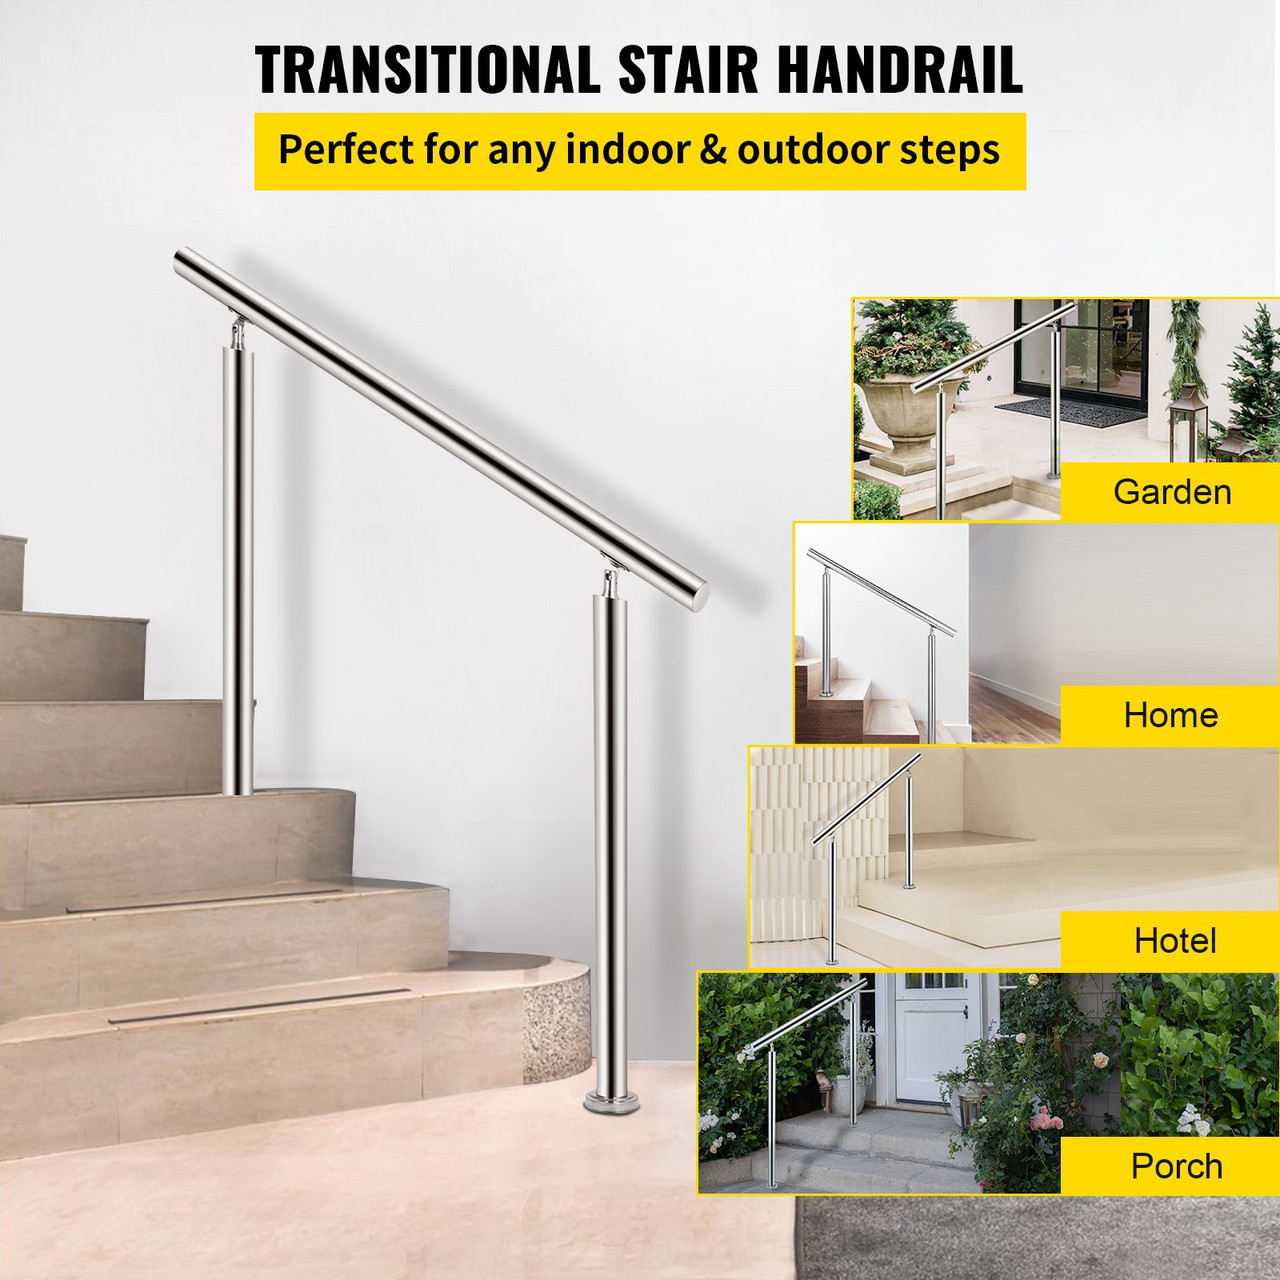 Stainless Steel Handrail 551LBS Load Handrail for Outdoor Steps 55x34" Outdoor Stair Railing Silver Stair Handrail Transitional Range from 0 to 90Ã¸